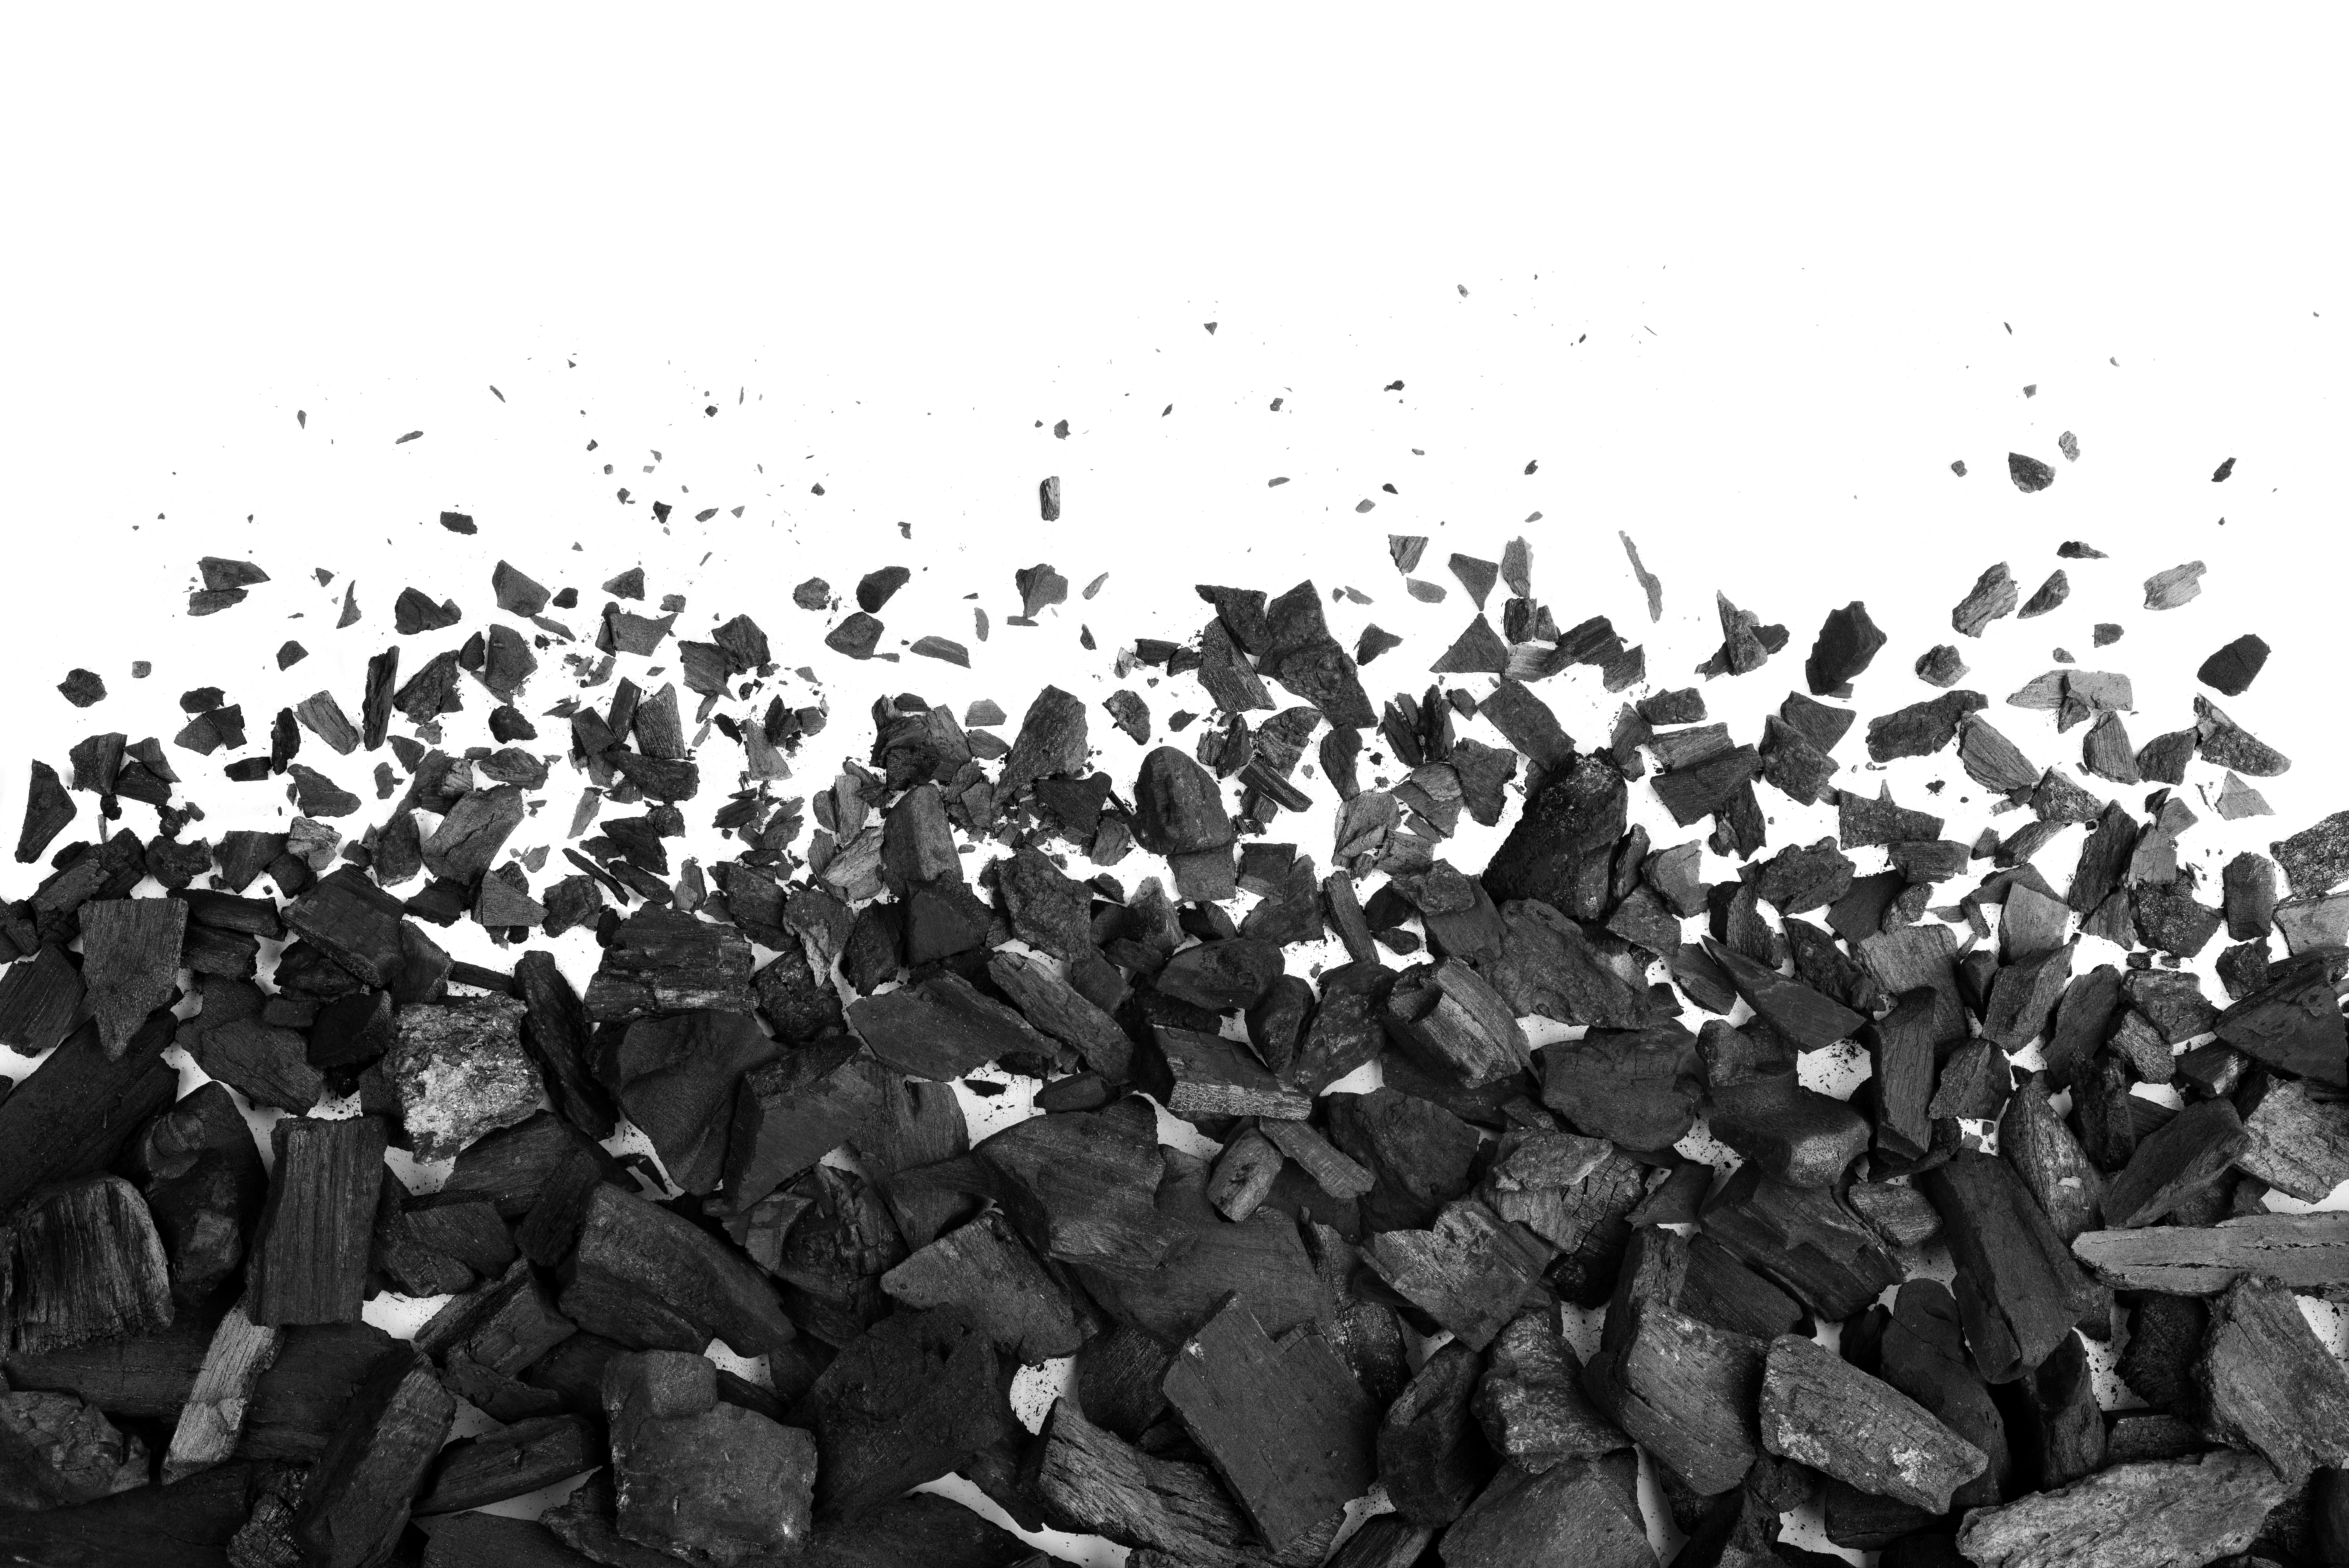 The project aims at developing knowledge of bio-coal in order to replace as much fossil coal as possible.